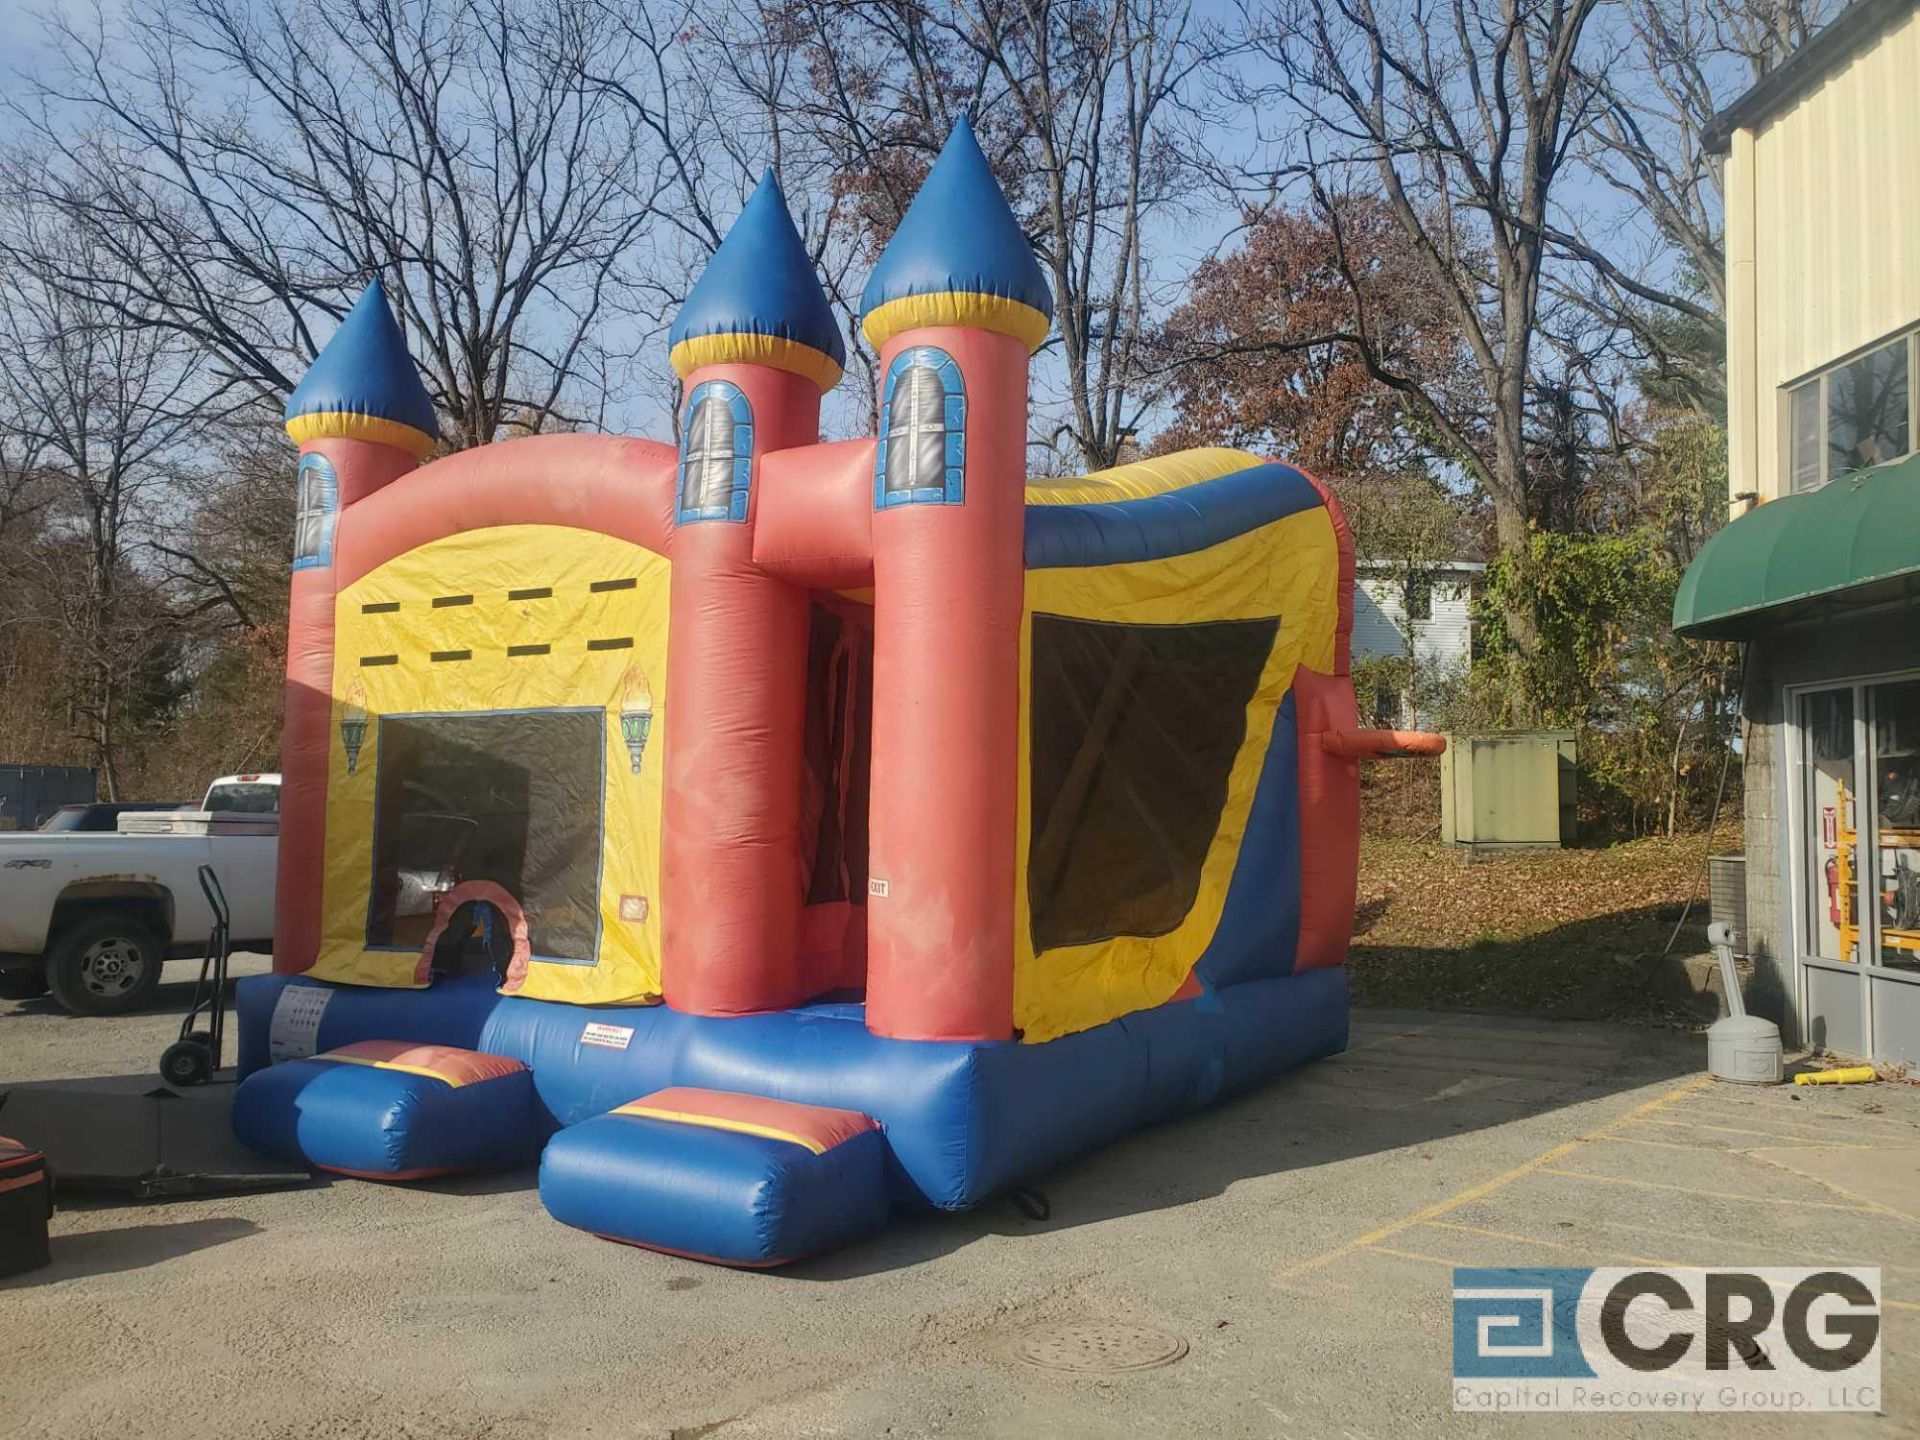 5 in 1 inflatable castle with blower - Image 2 of 4